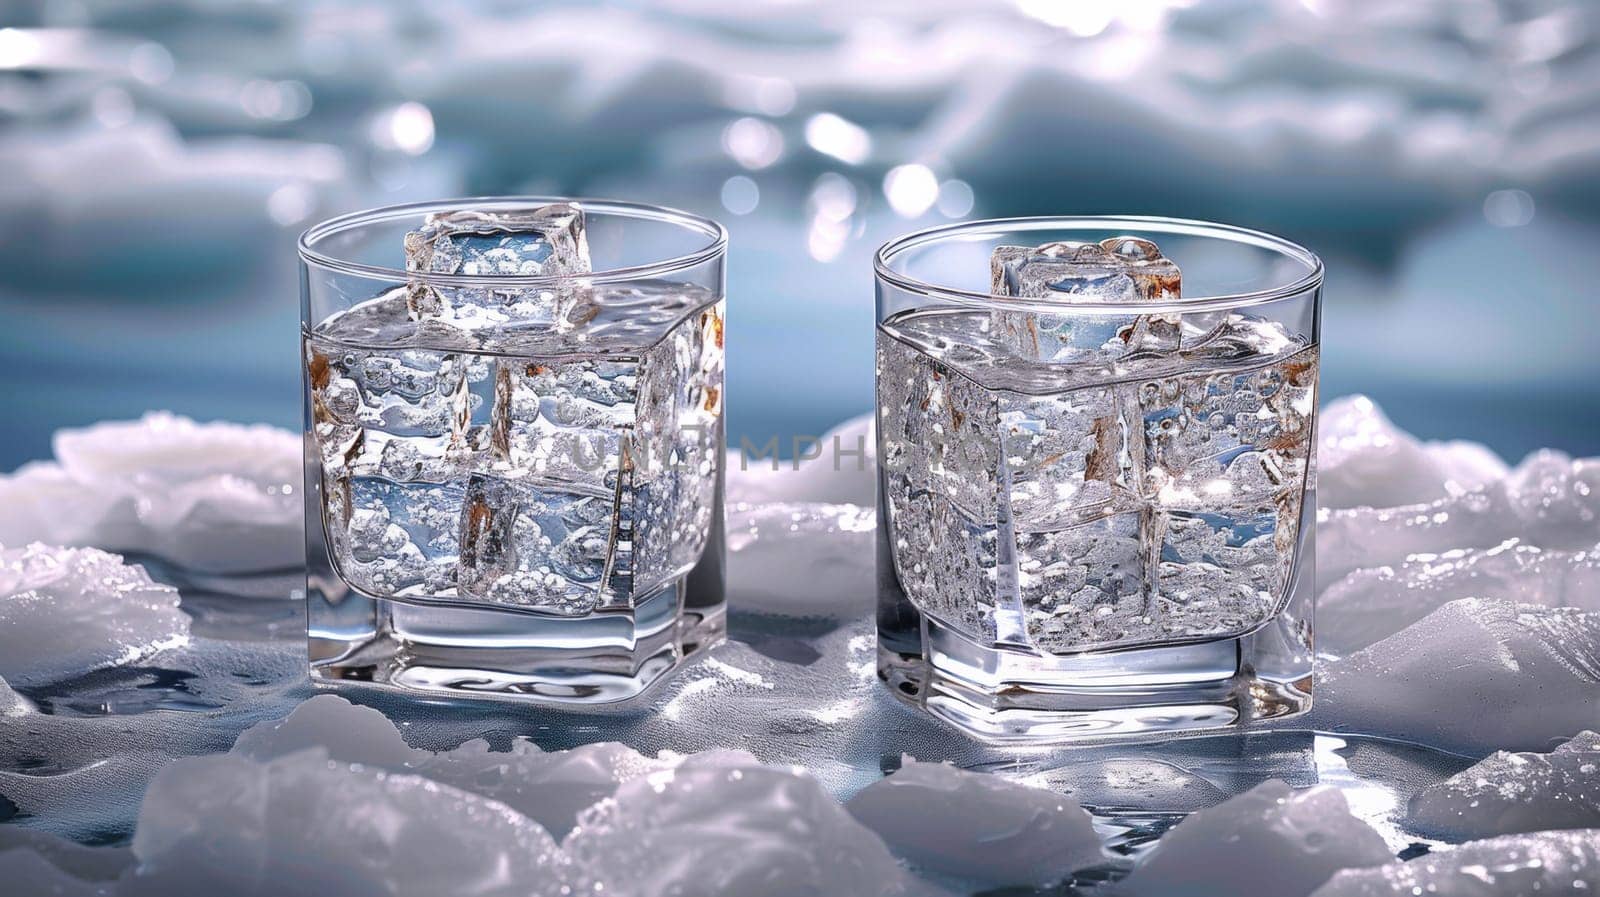 Two glasses of water with ice cubes in them on a table